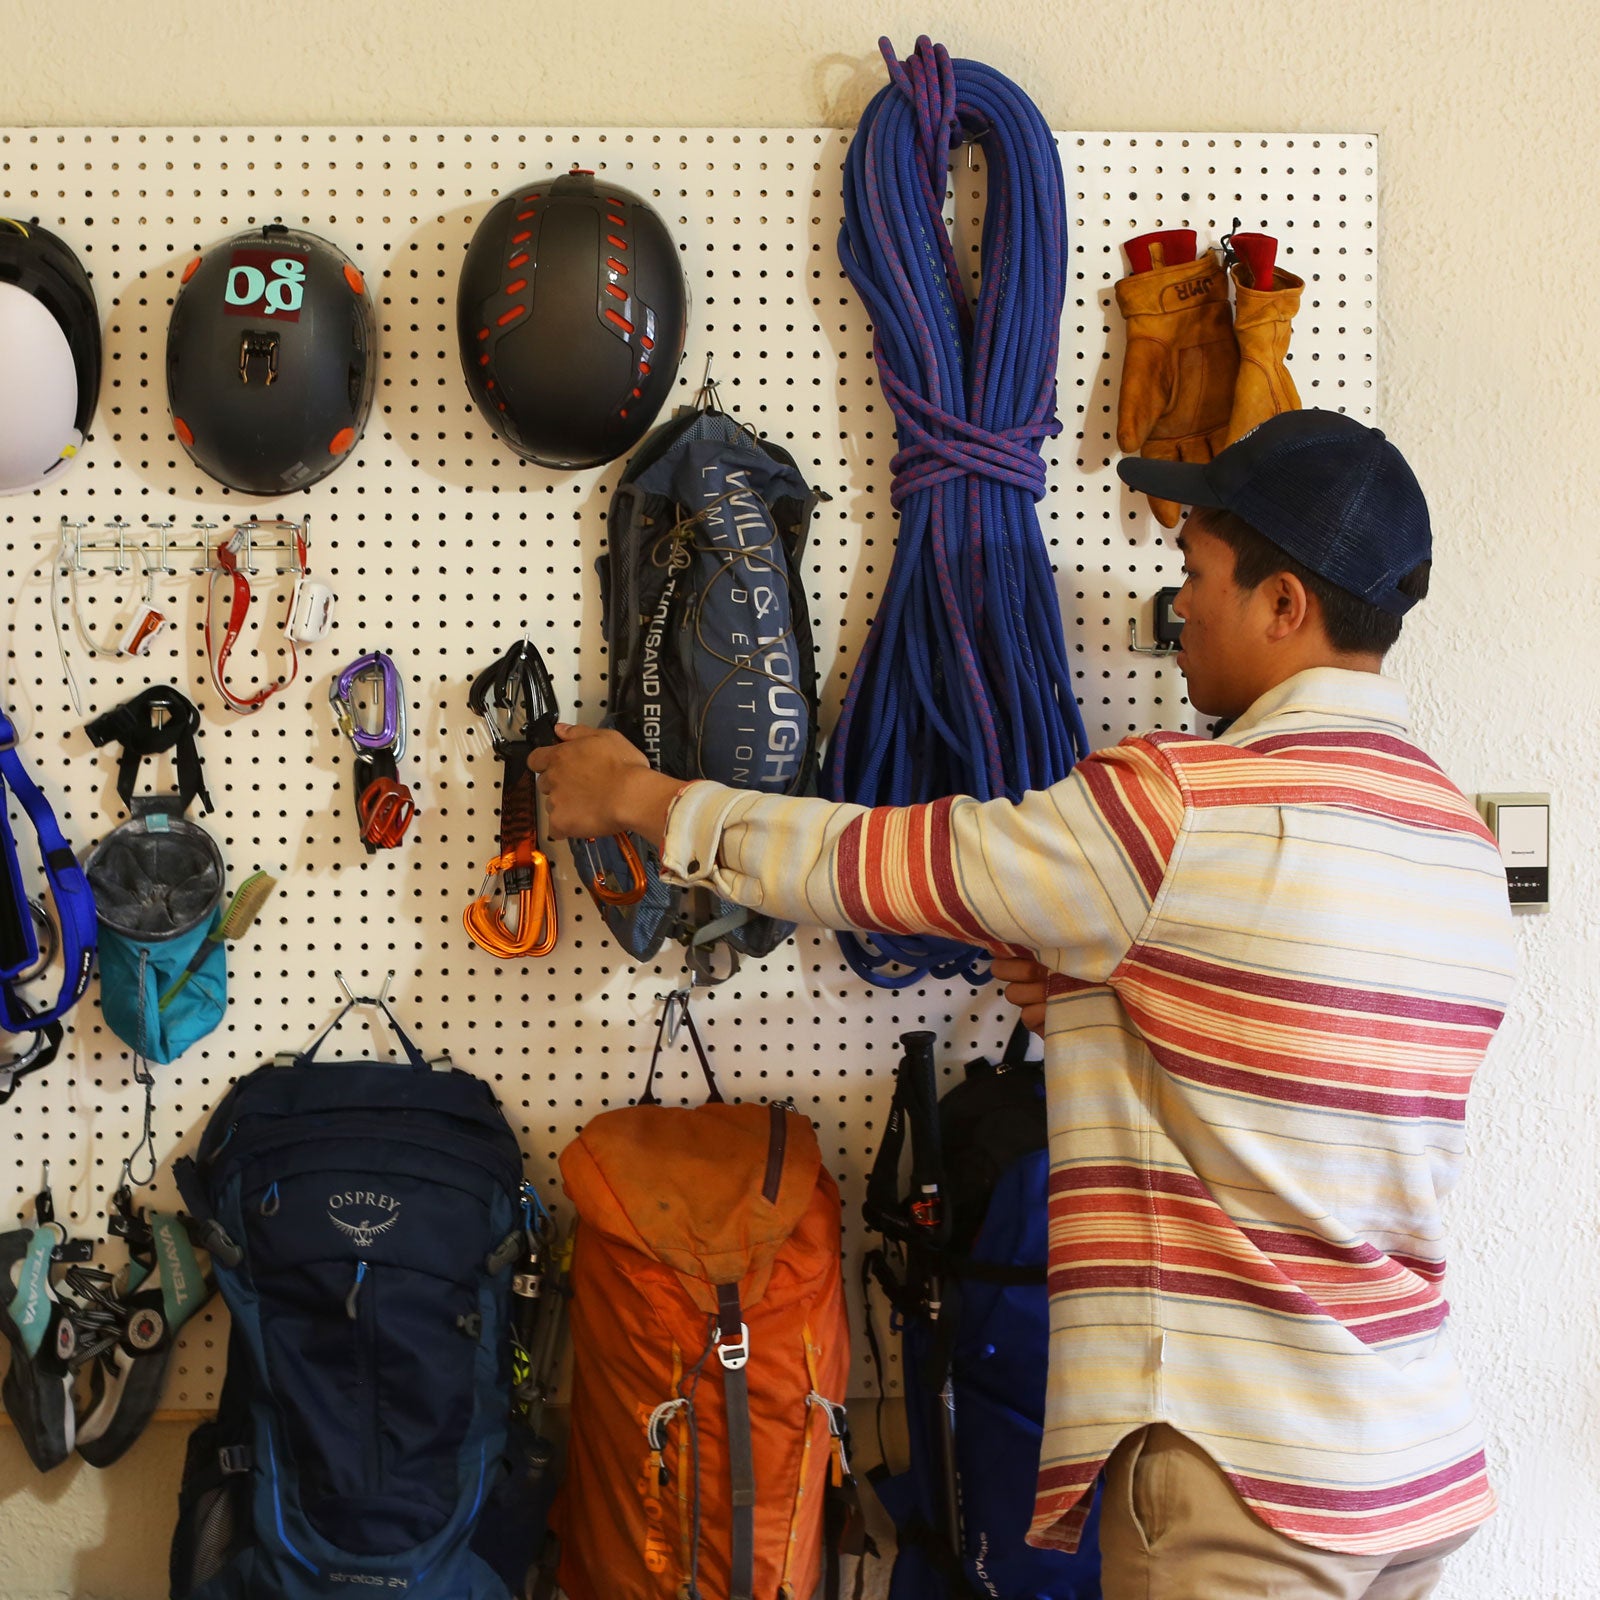 How to Organize Gear in a Small Space